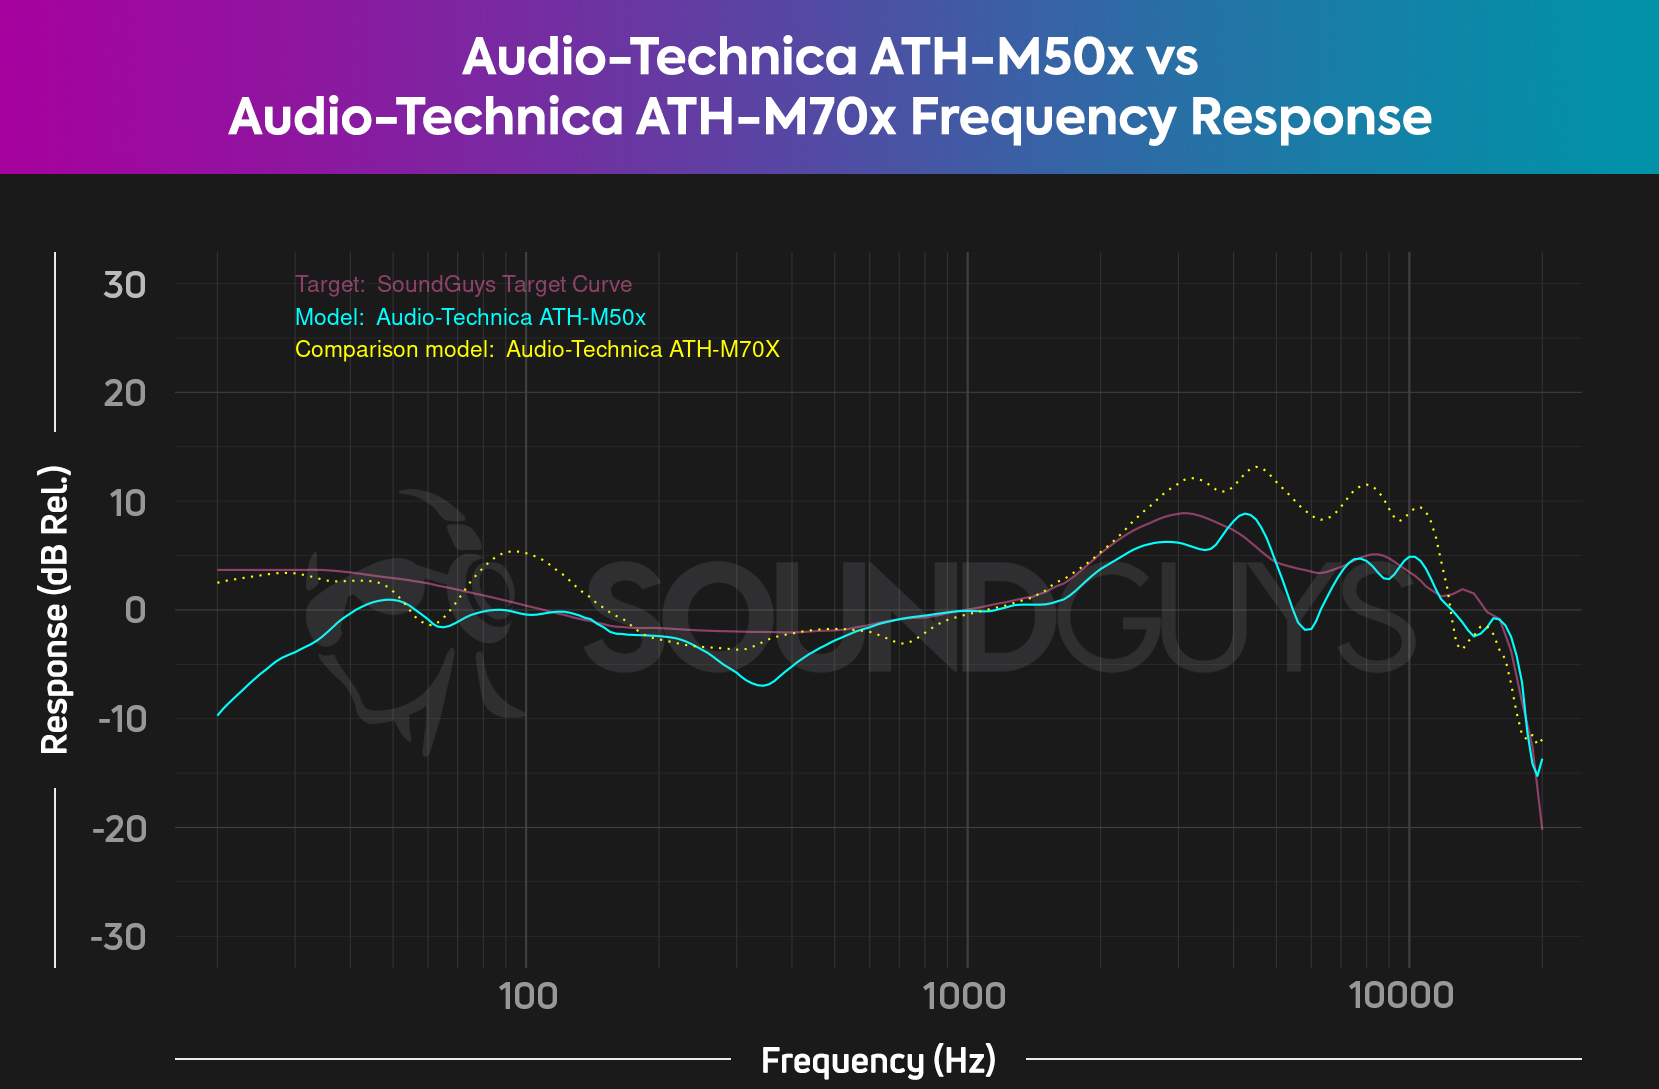 A comparison chart shows the Audio-Technica ATH-M50x versus the Audio-Technica ATH-M70x and our ideal frequency response.